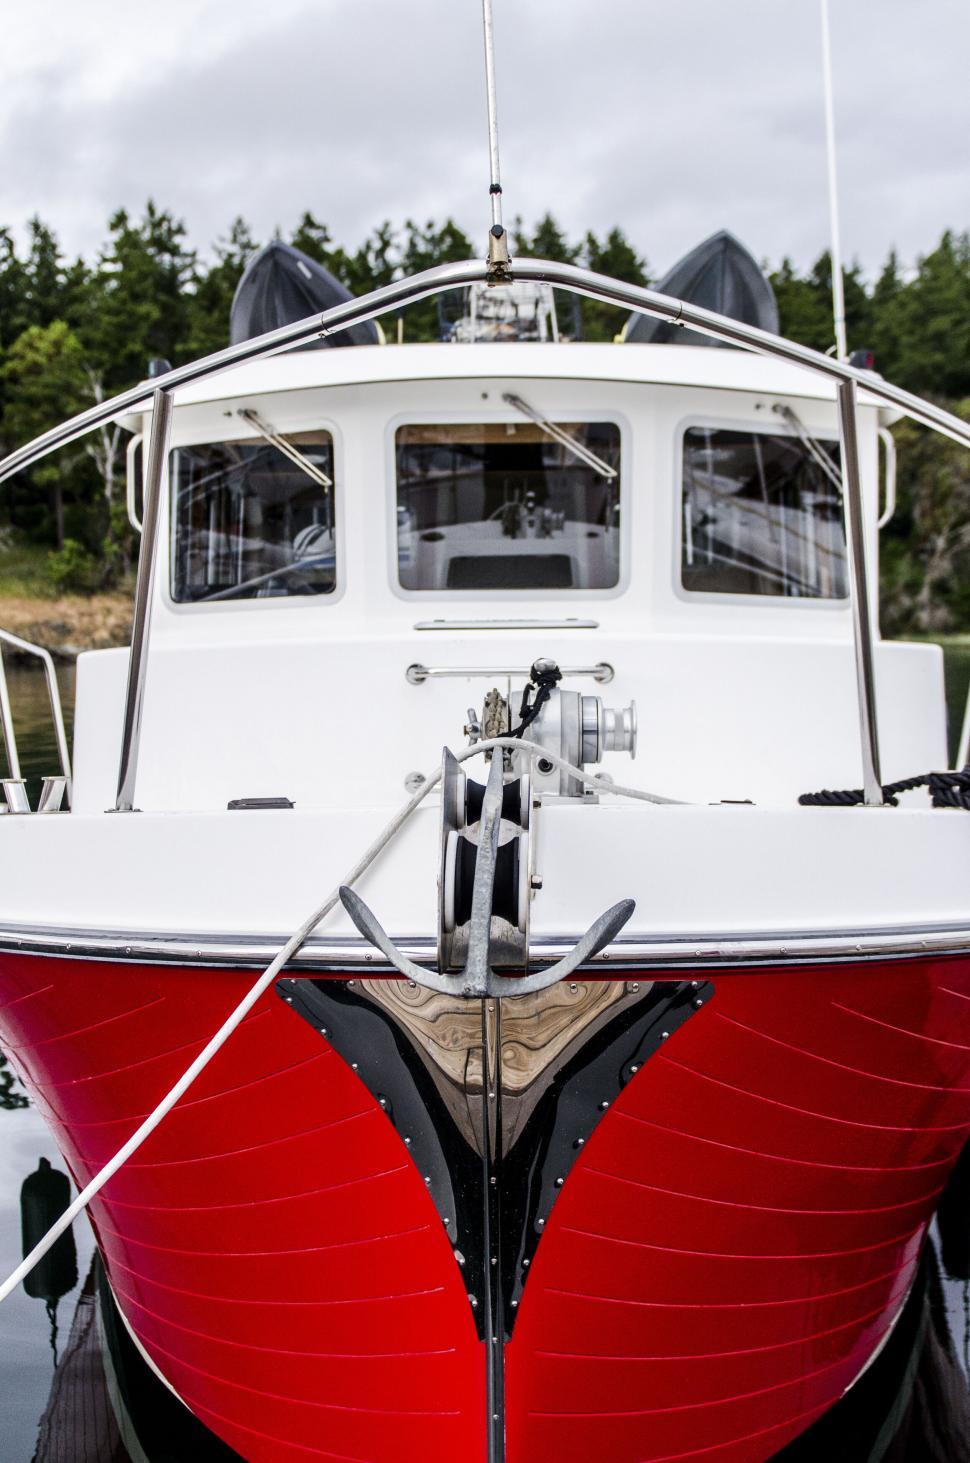 Free Image of Red and white boat moored at dock 